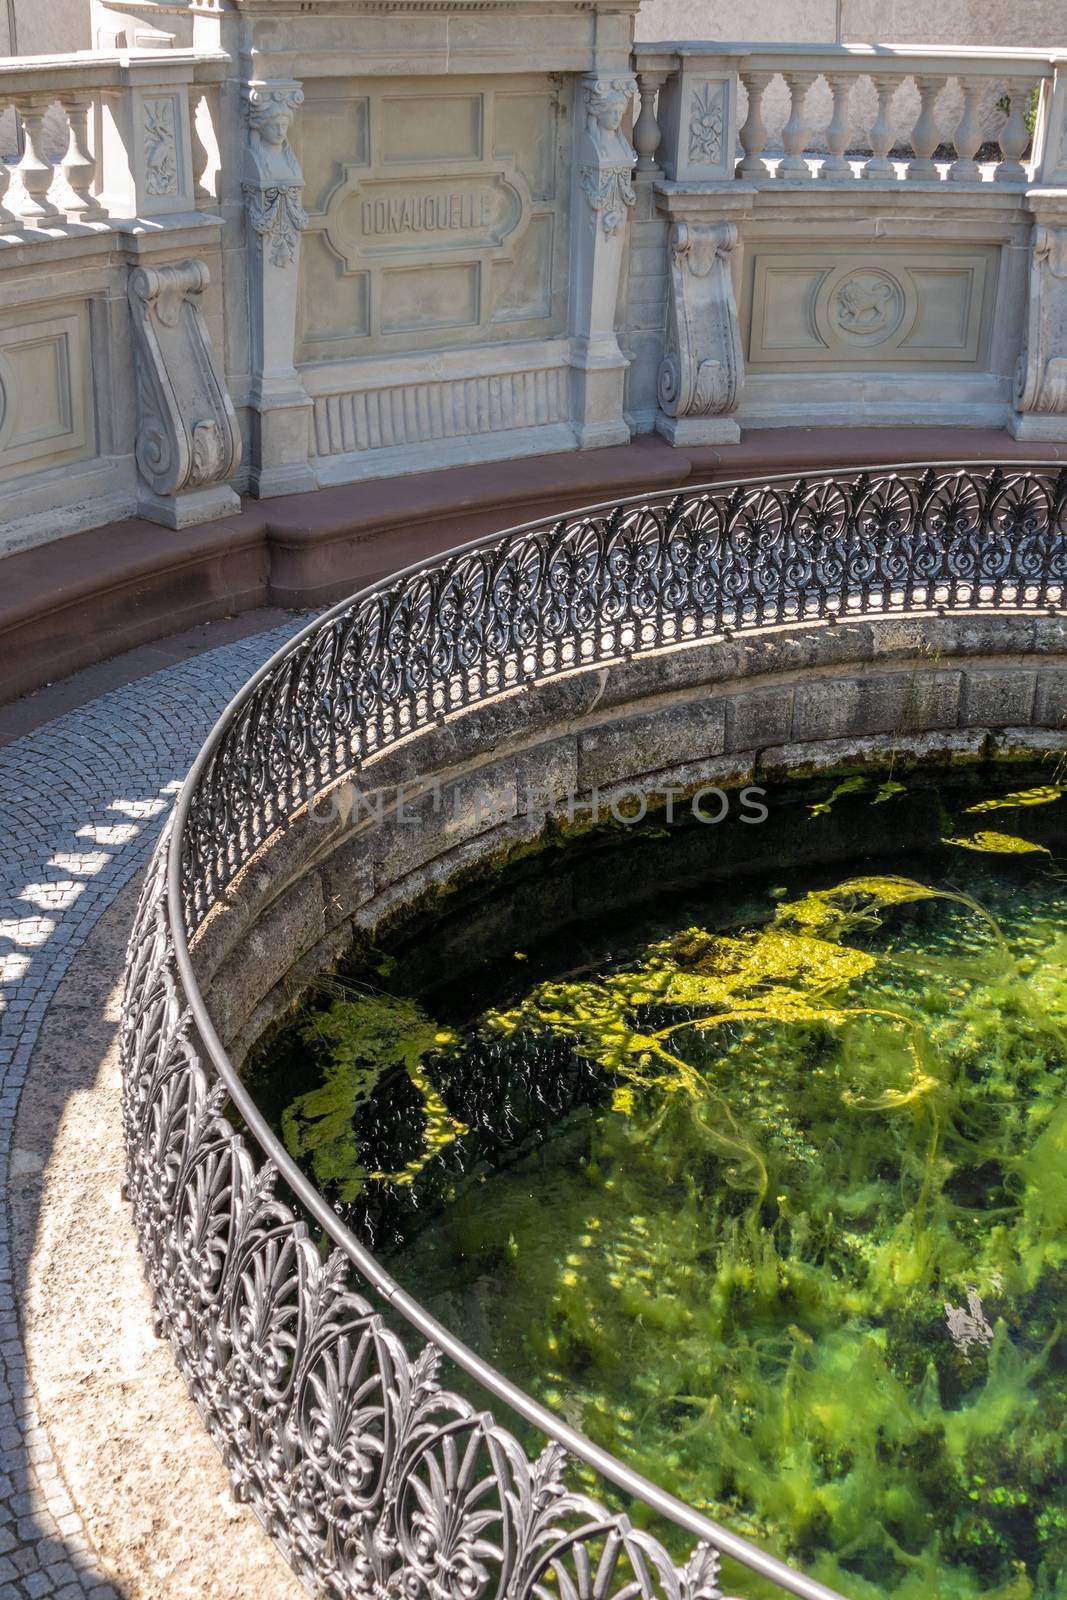 An image of the Danube spring in Donaueschingen Germany